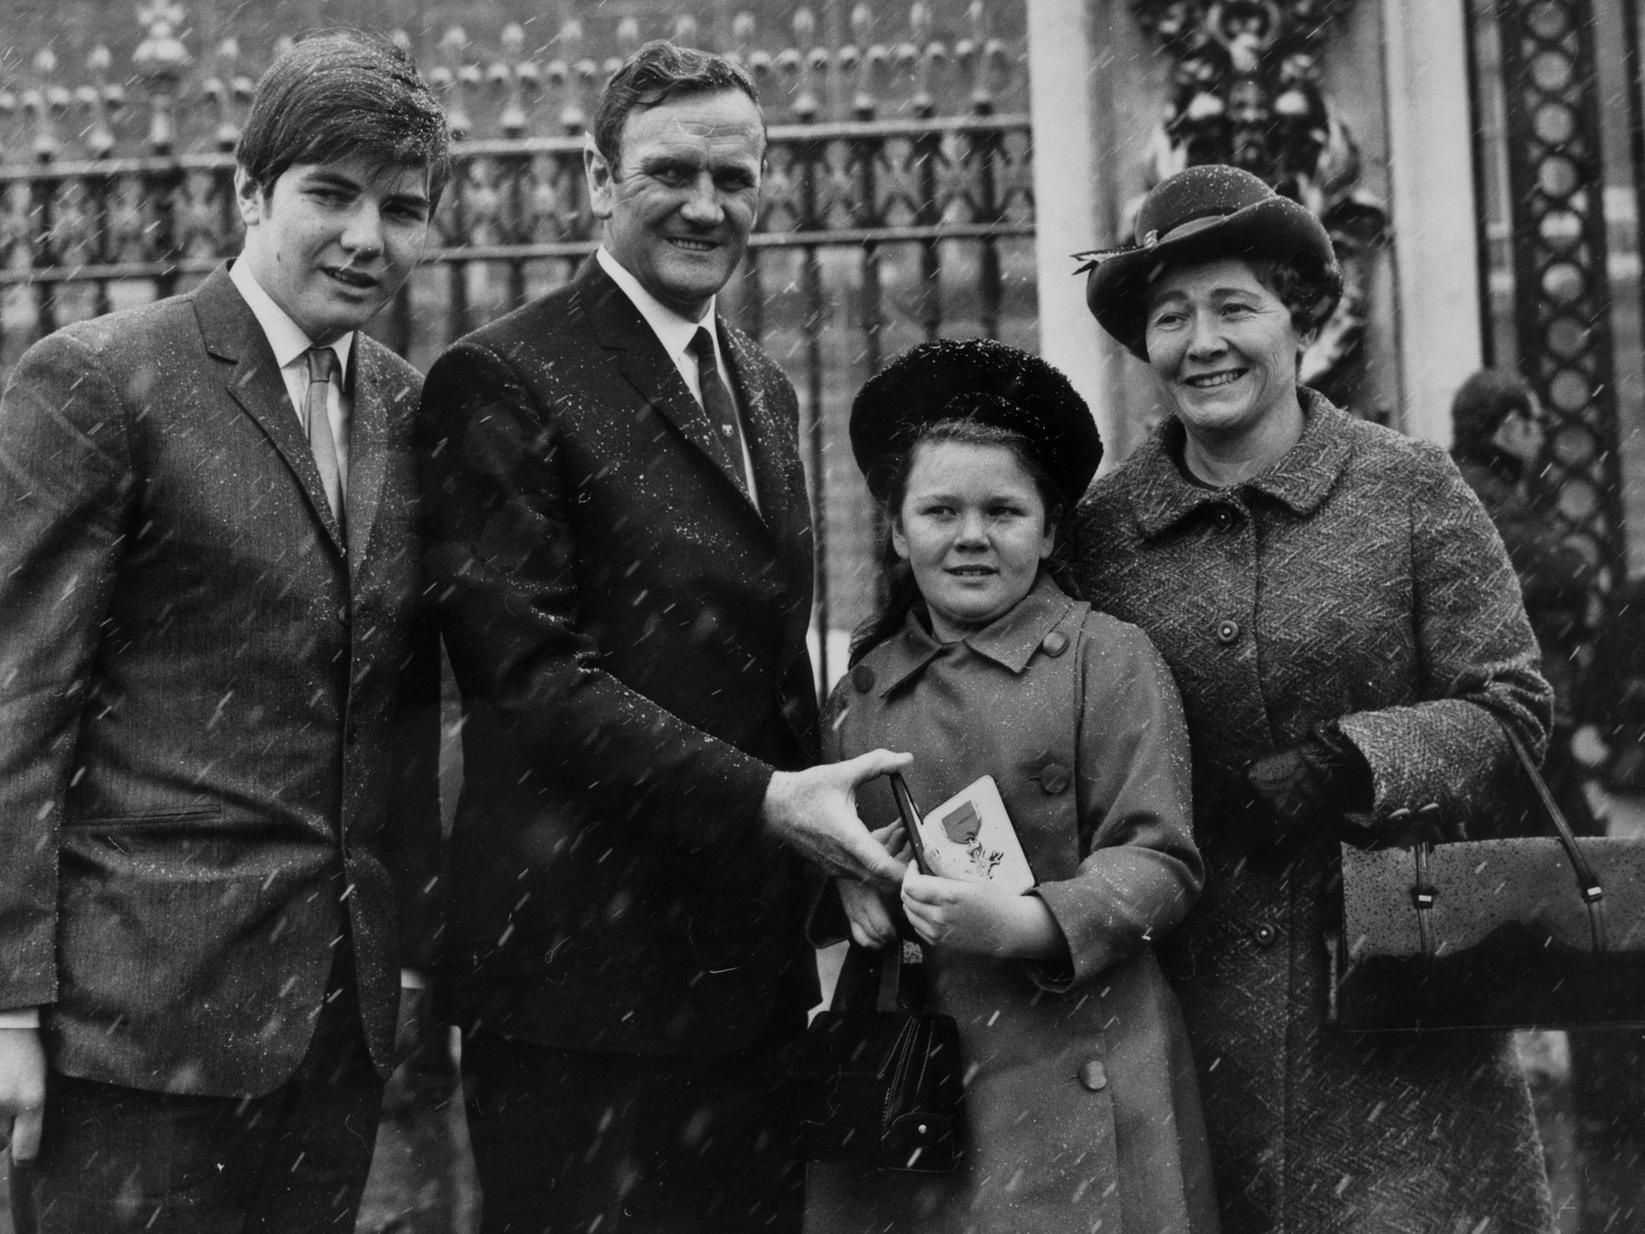 Don Revie with his son Don, daughter Kim and wife Elsie at Buckingham Palace after receiving the OBE